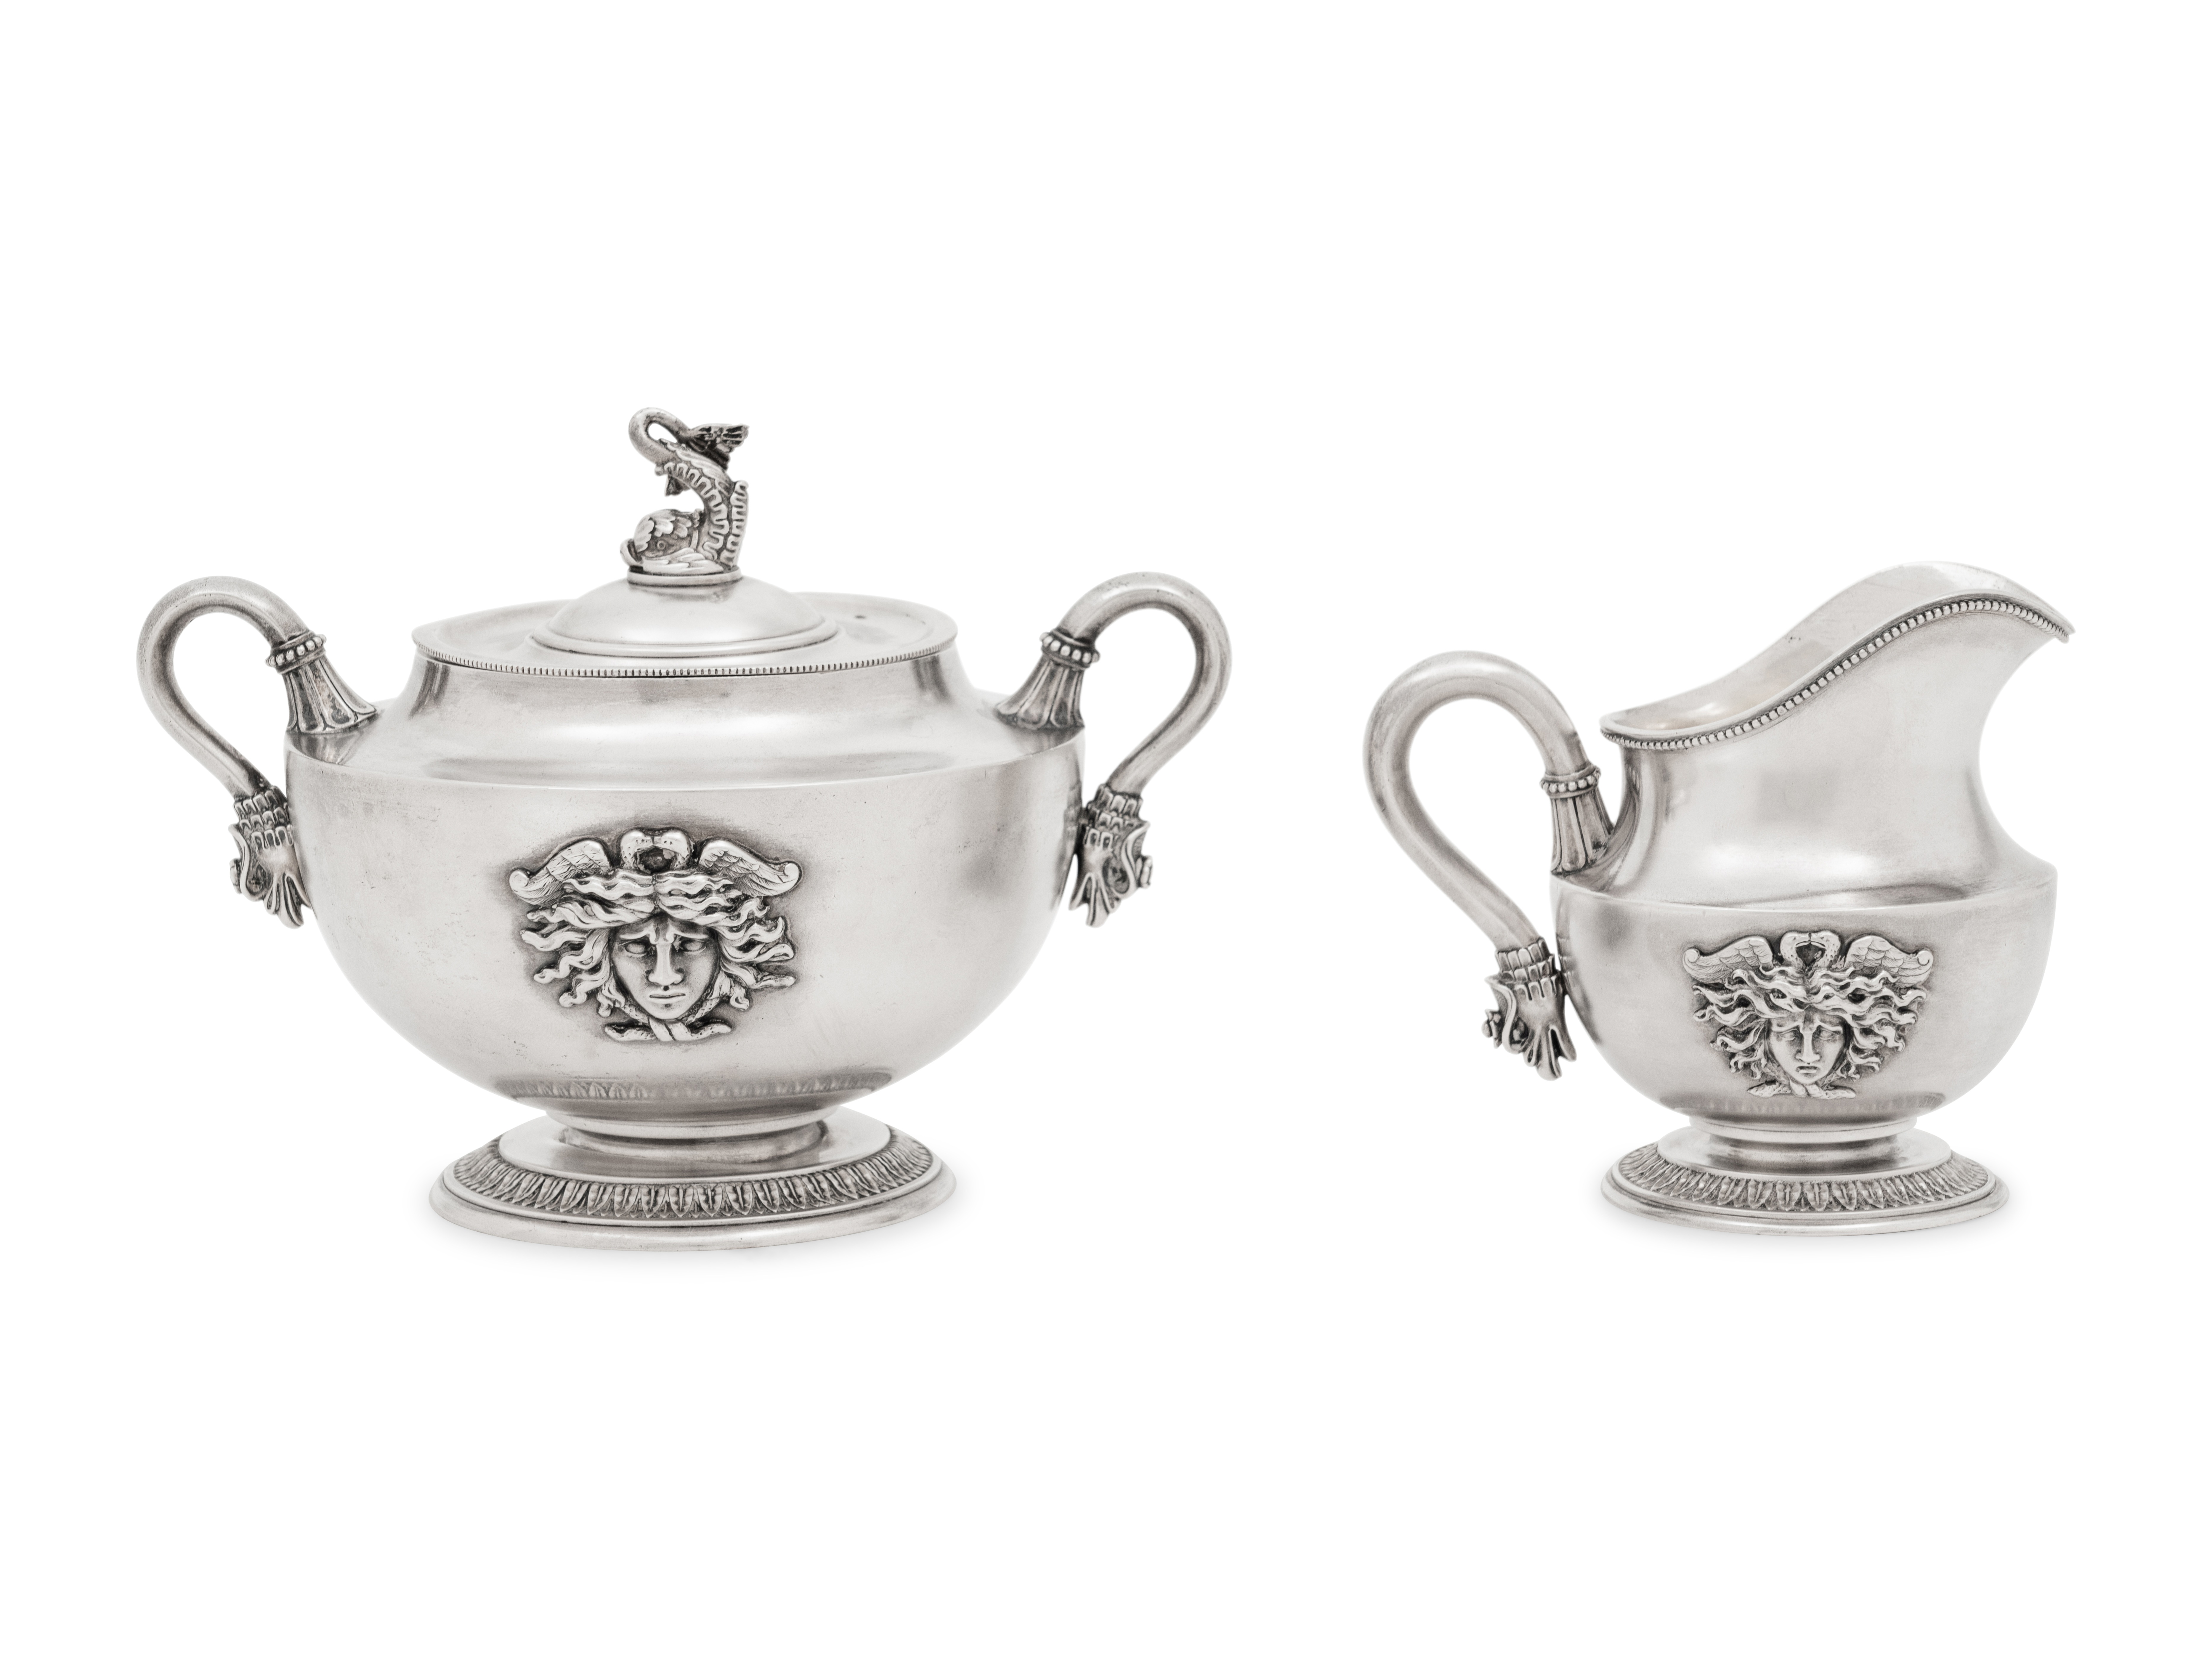 A Faberge Silver Creamer and Covered Sugar Set - Image 3 of 10